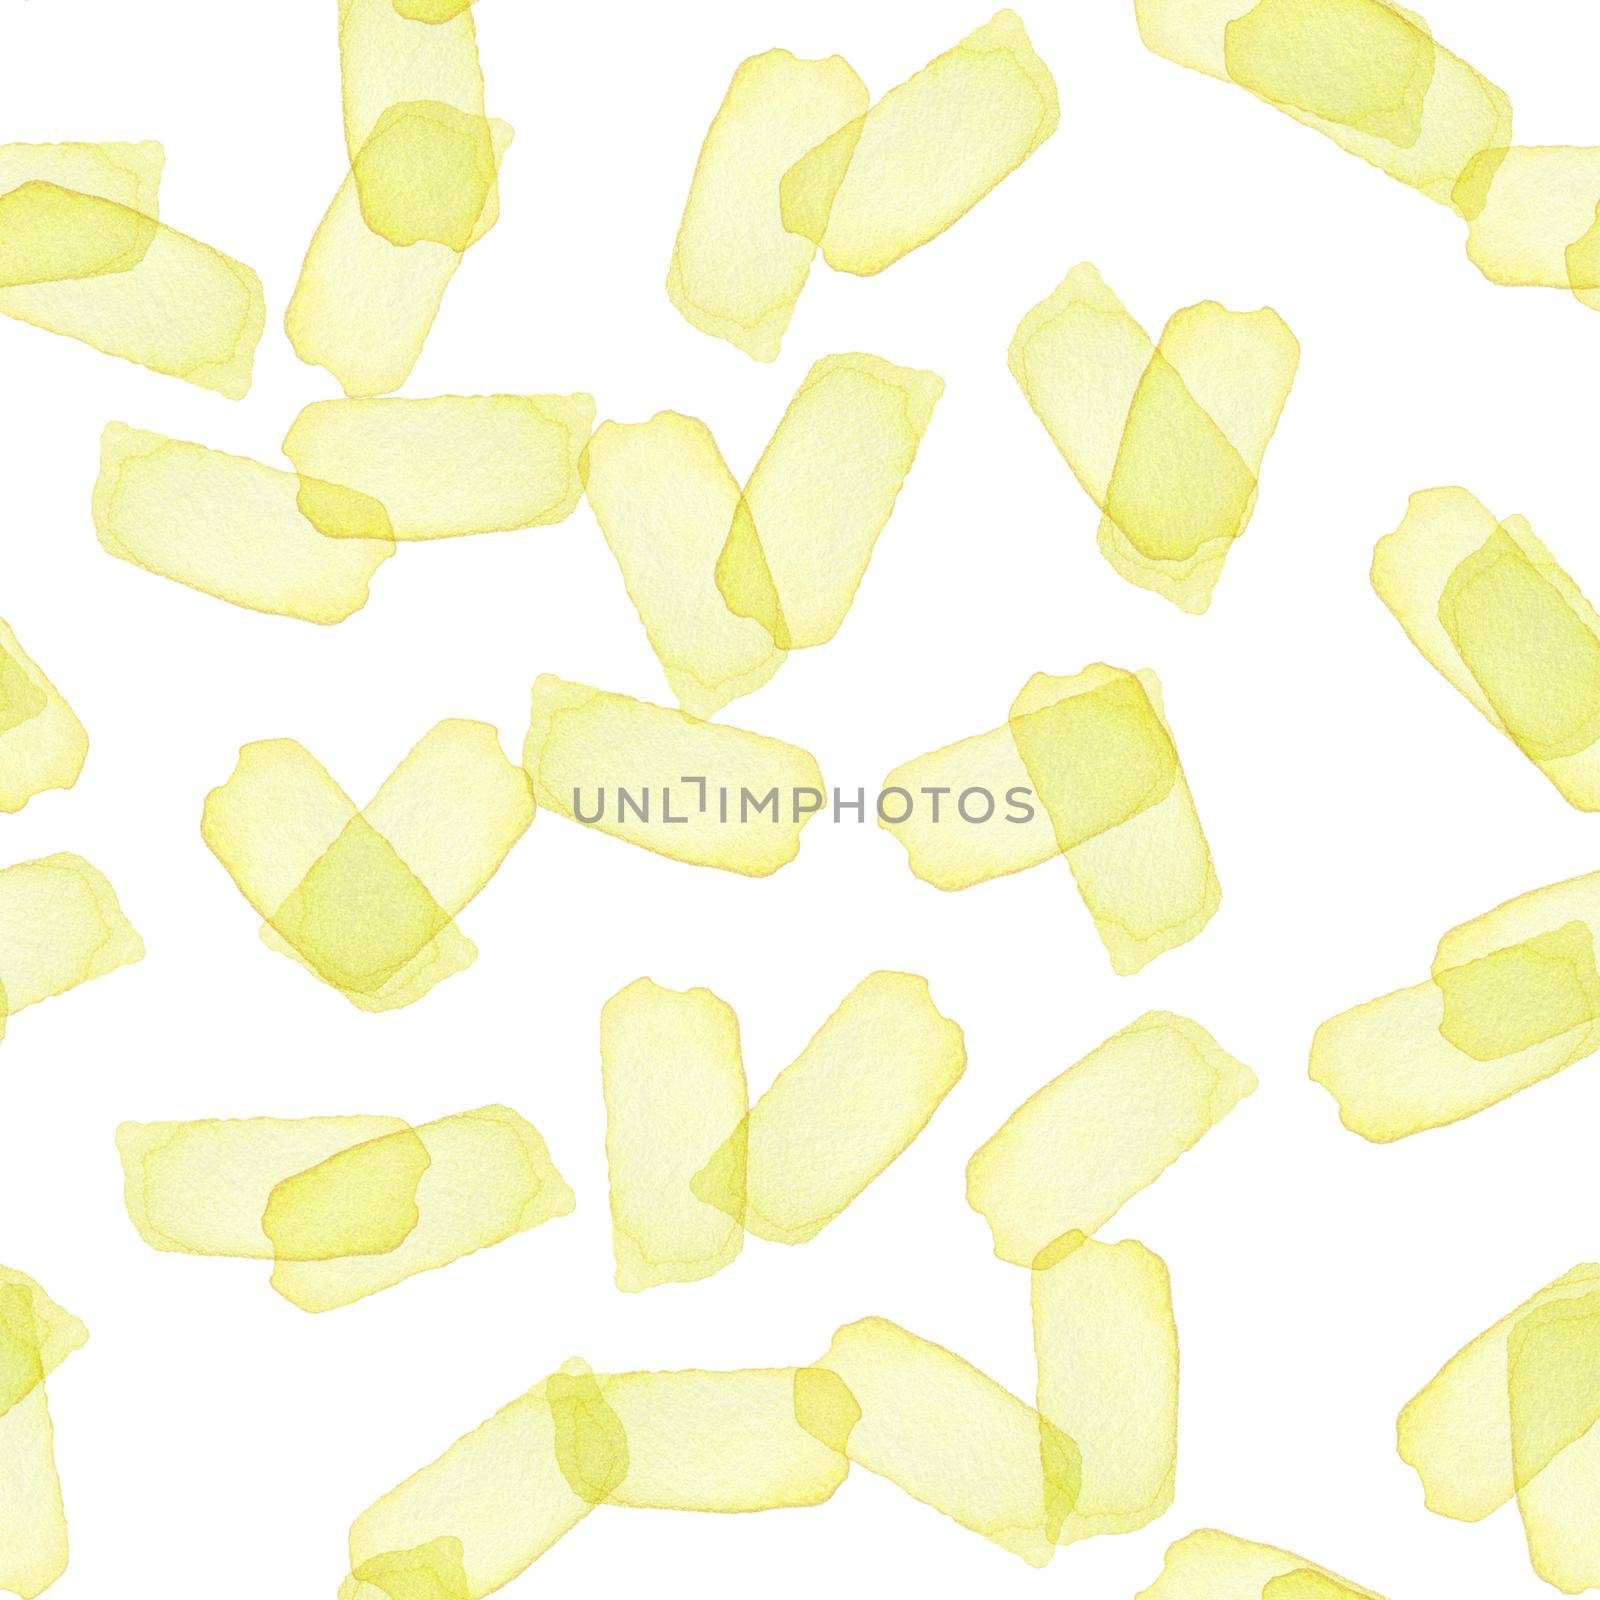 Hand Painted Brush Stroke Seamless Watercolor Pattern. Abstract Sunny Summer watercolour shapes in Yellow Color. Artistic Design for Fabric and Background.